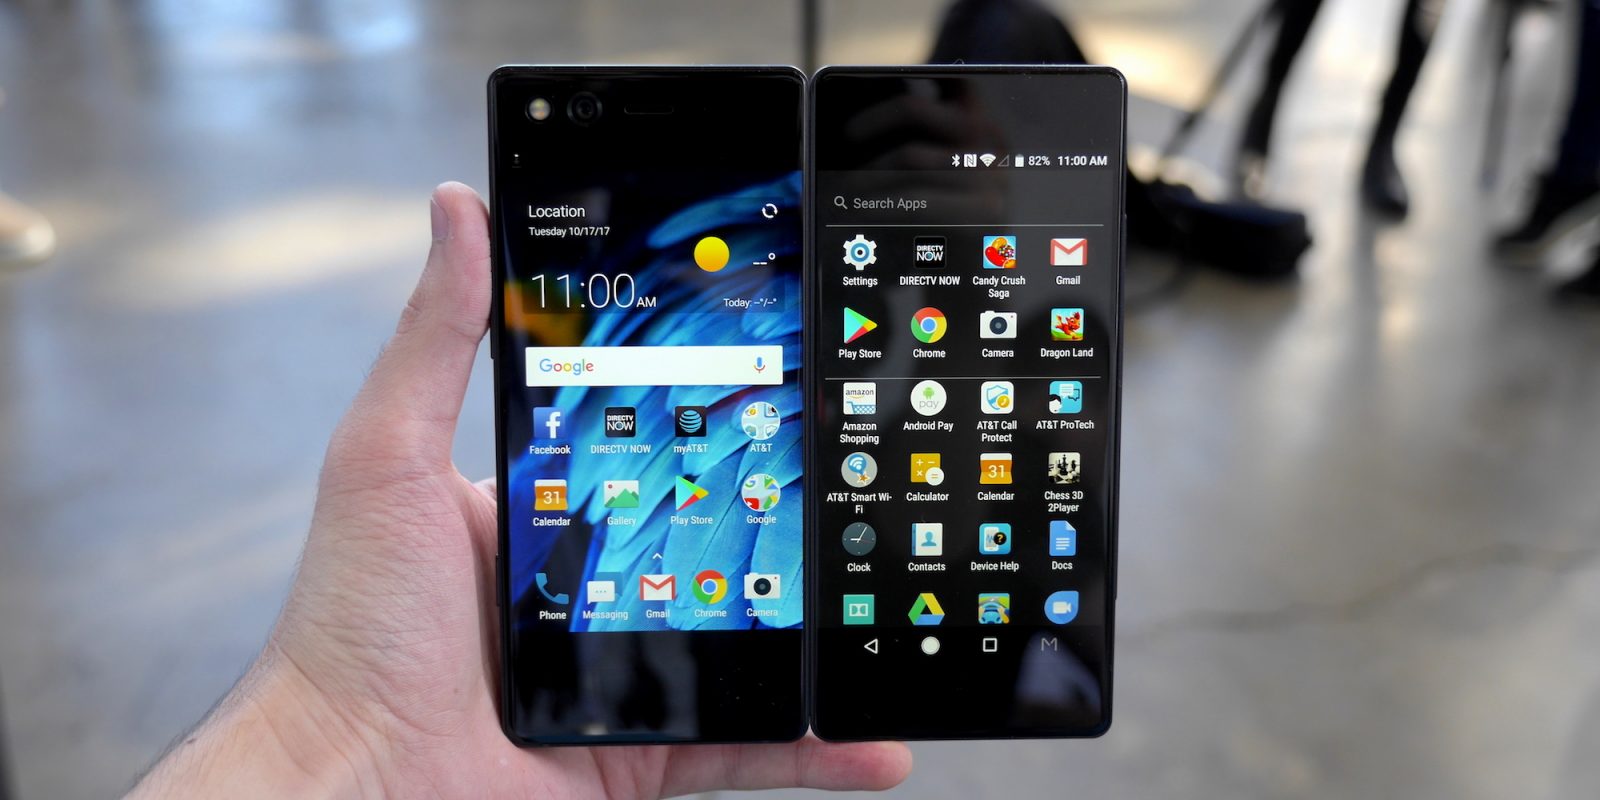 ZTE Axon M hands-on: the dual-screen foldable phone, take two [Video]